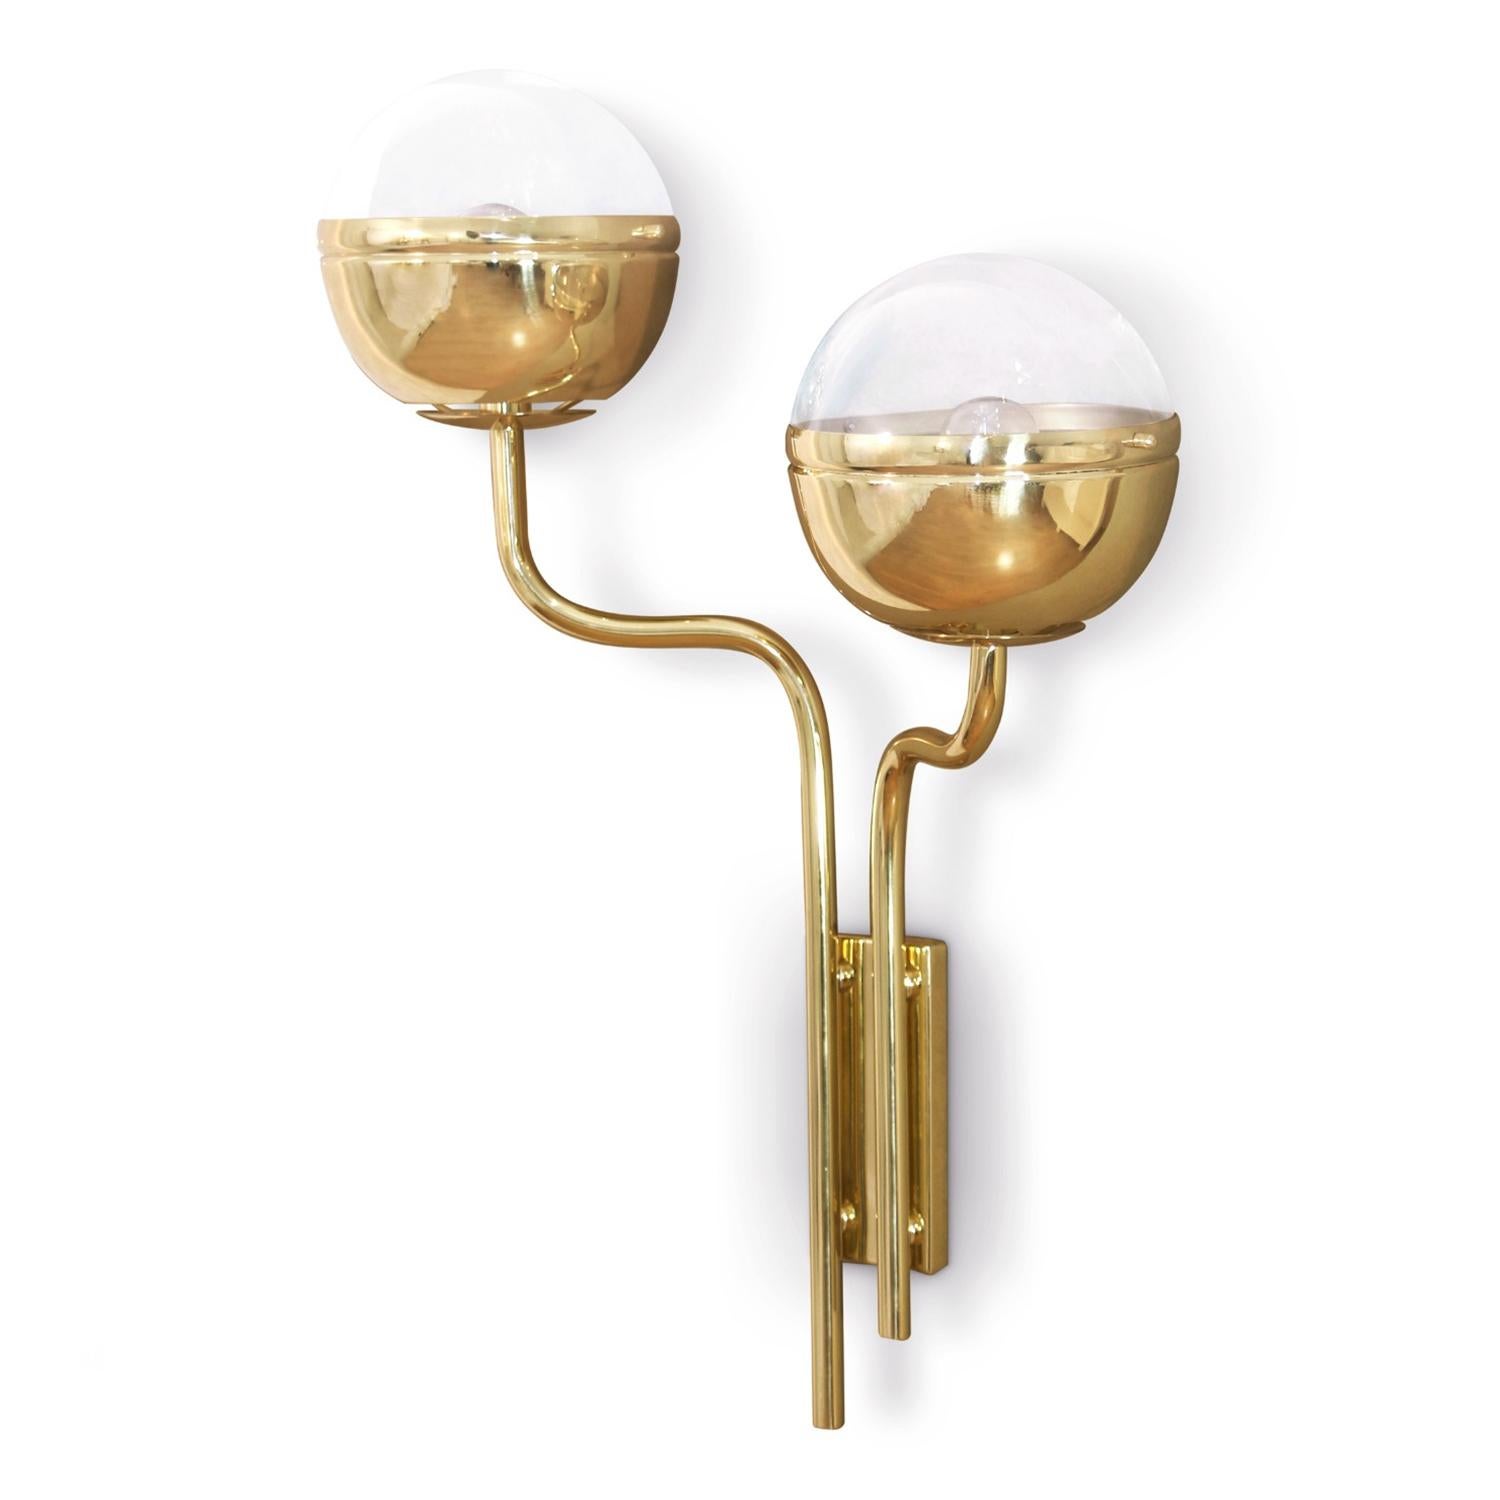 Wall lamp twin brass with structure in solid brass 
in polished finish and with 2 clear glass shades.